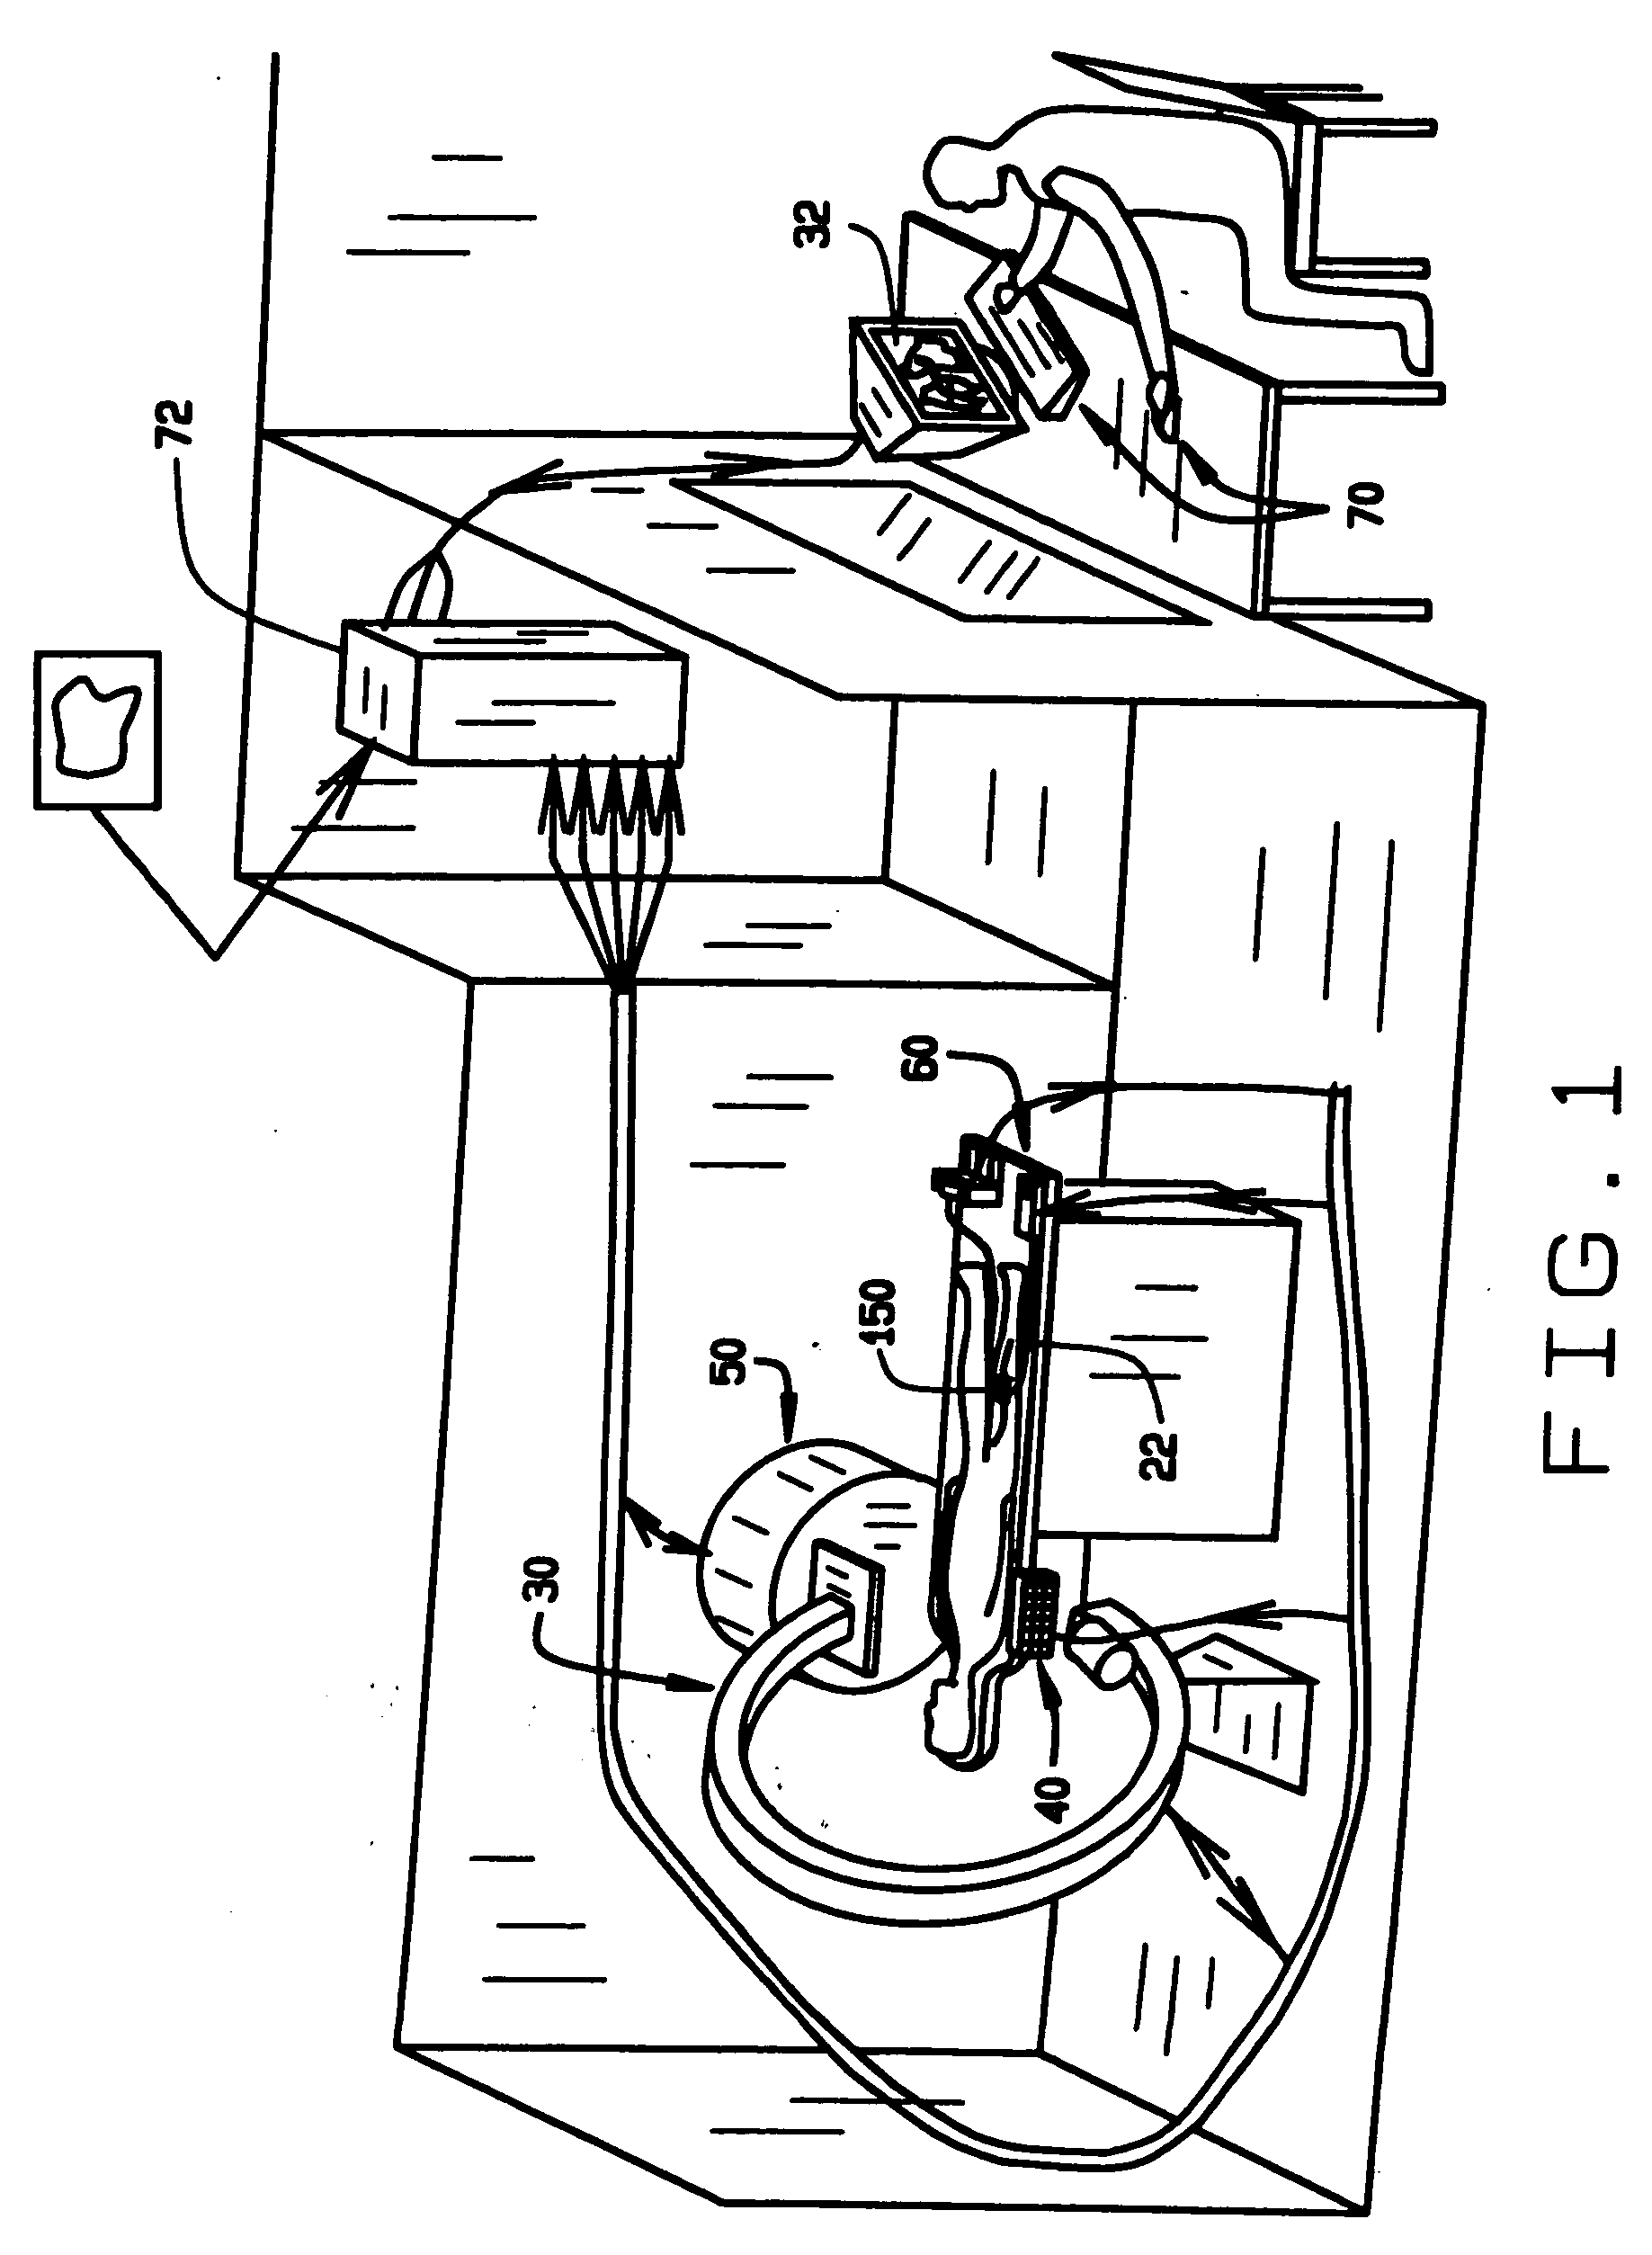 Systems and methods for interventional medicine